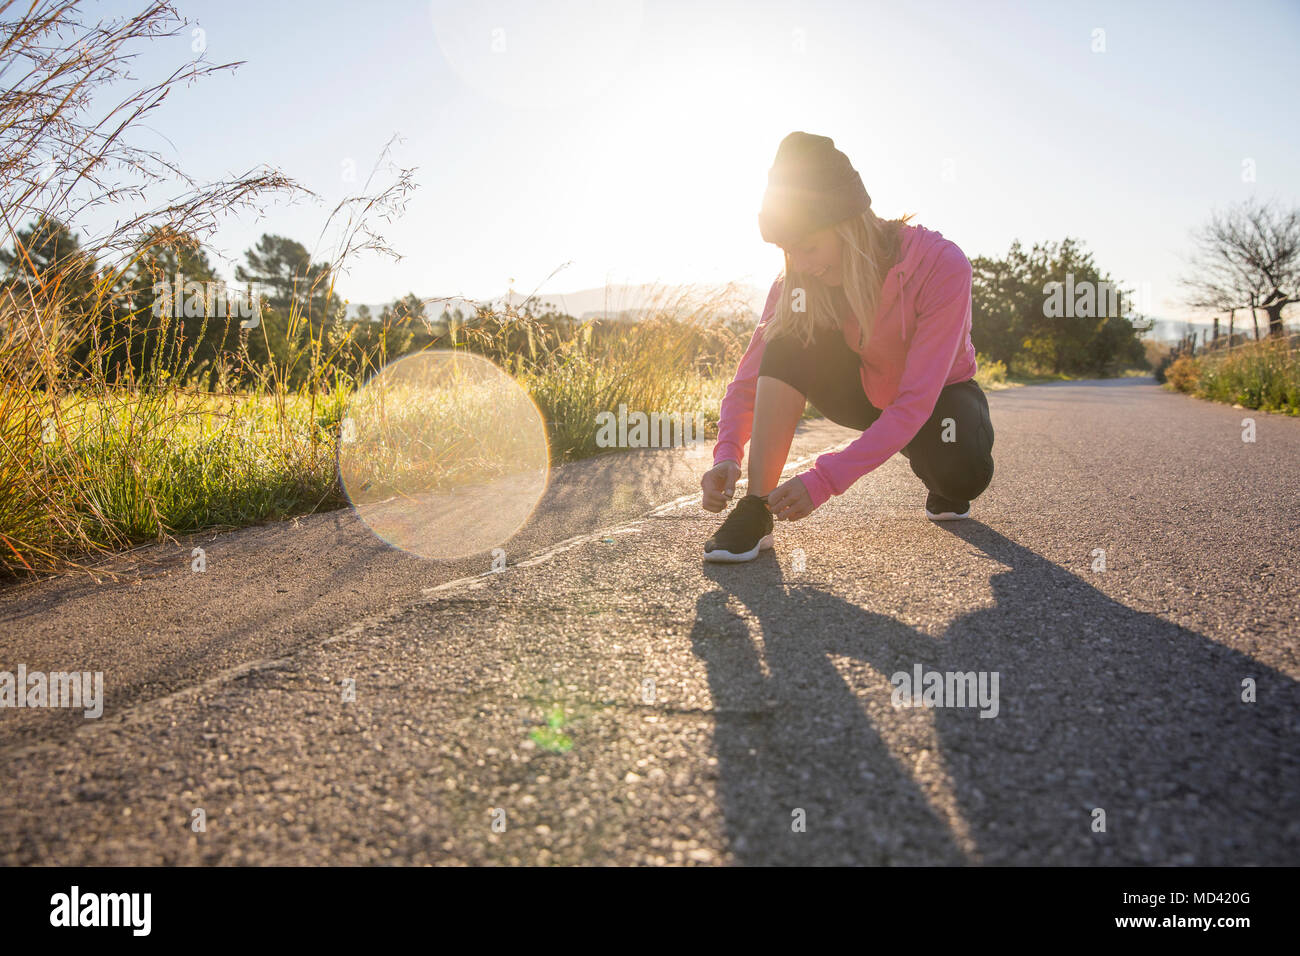 Young woman exercising outdoors, tying shoelace Stock Photo